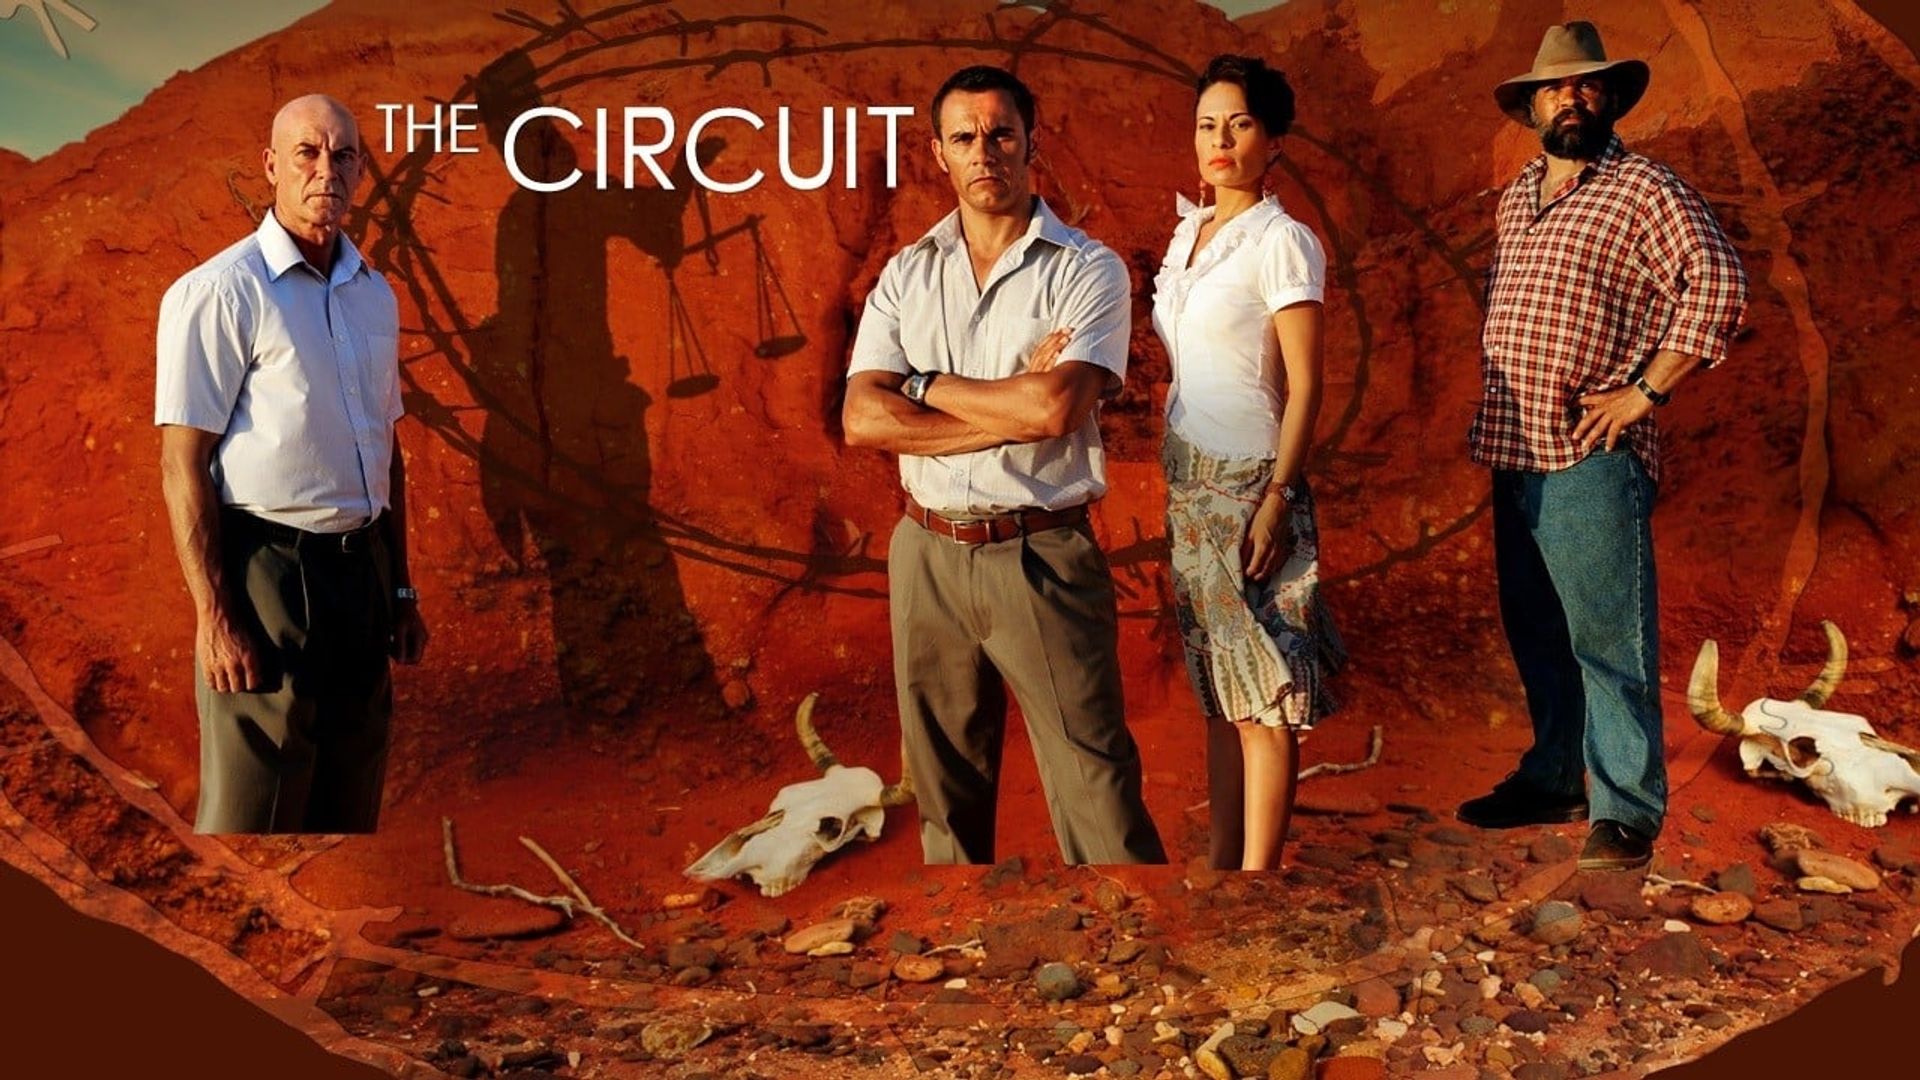 The Circuit background